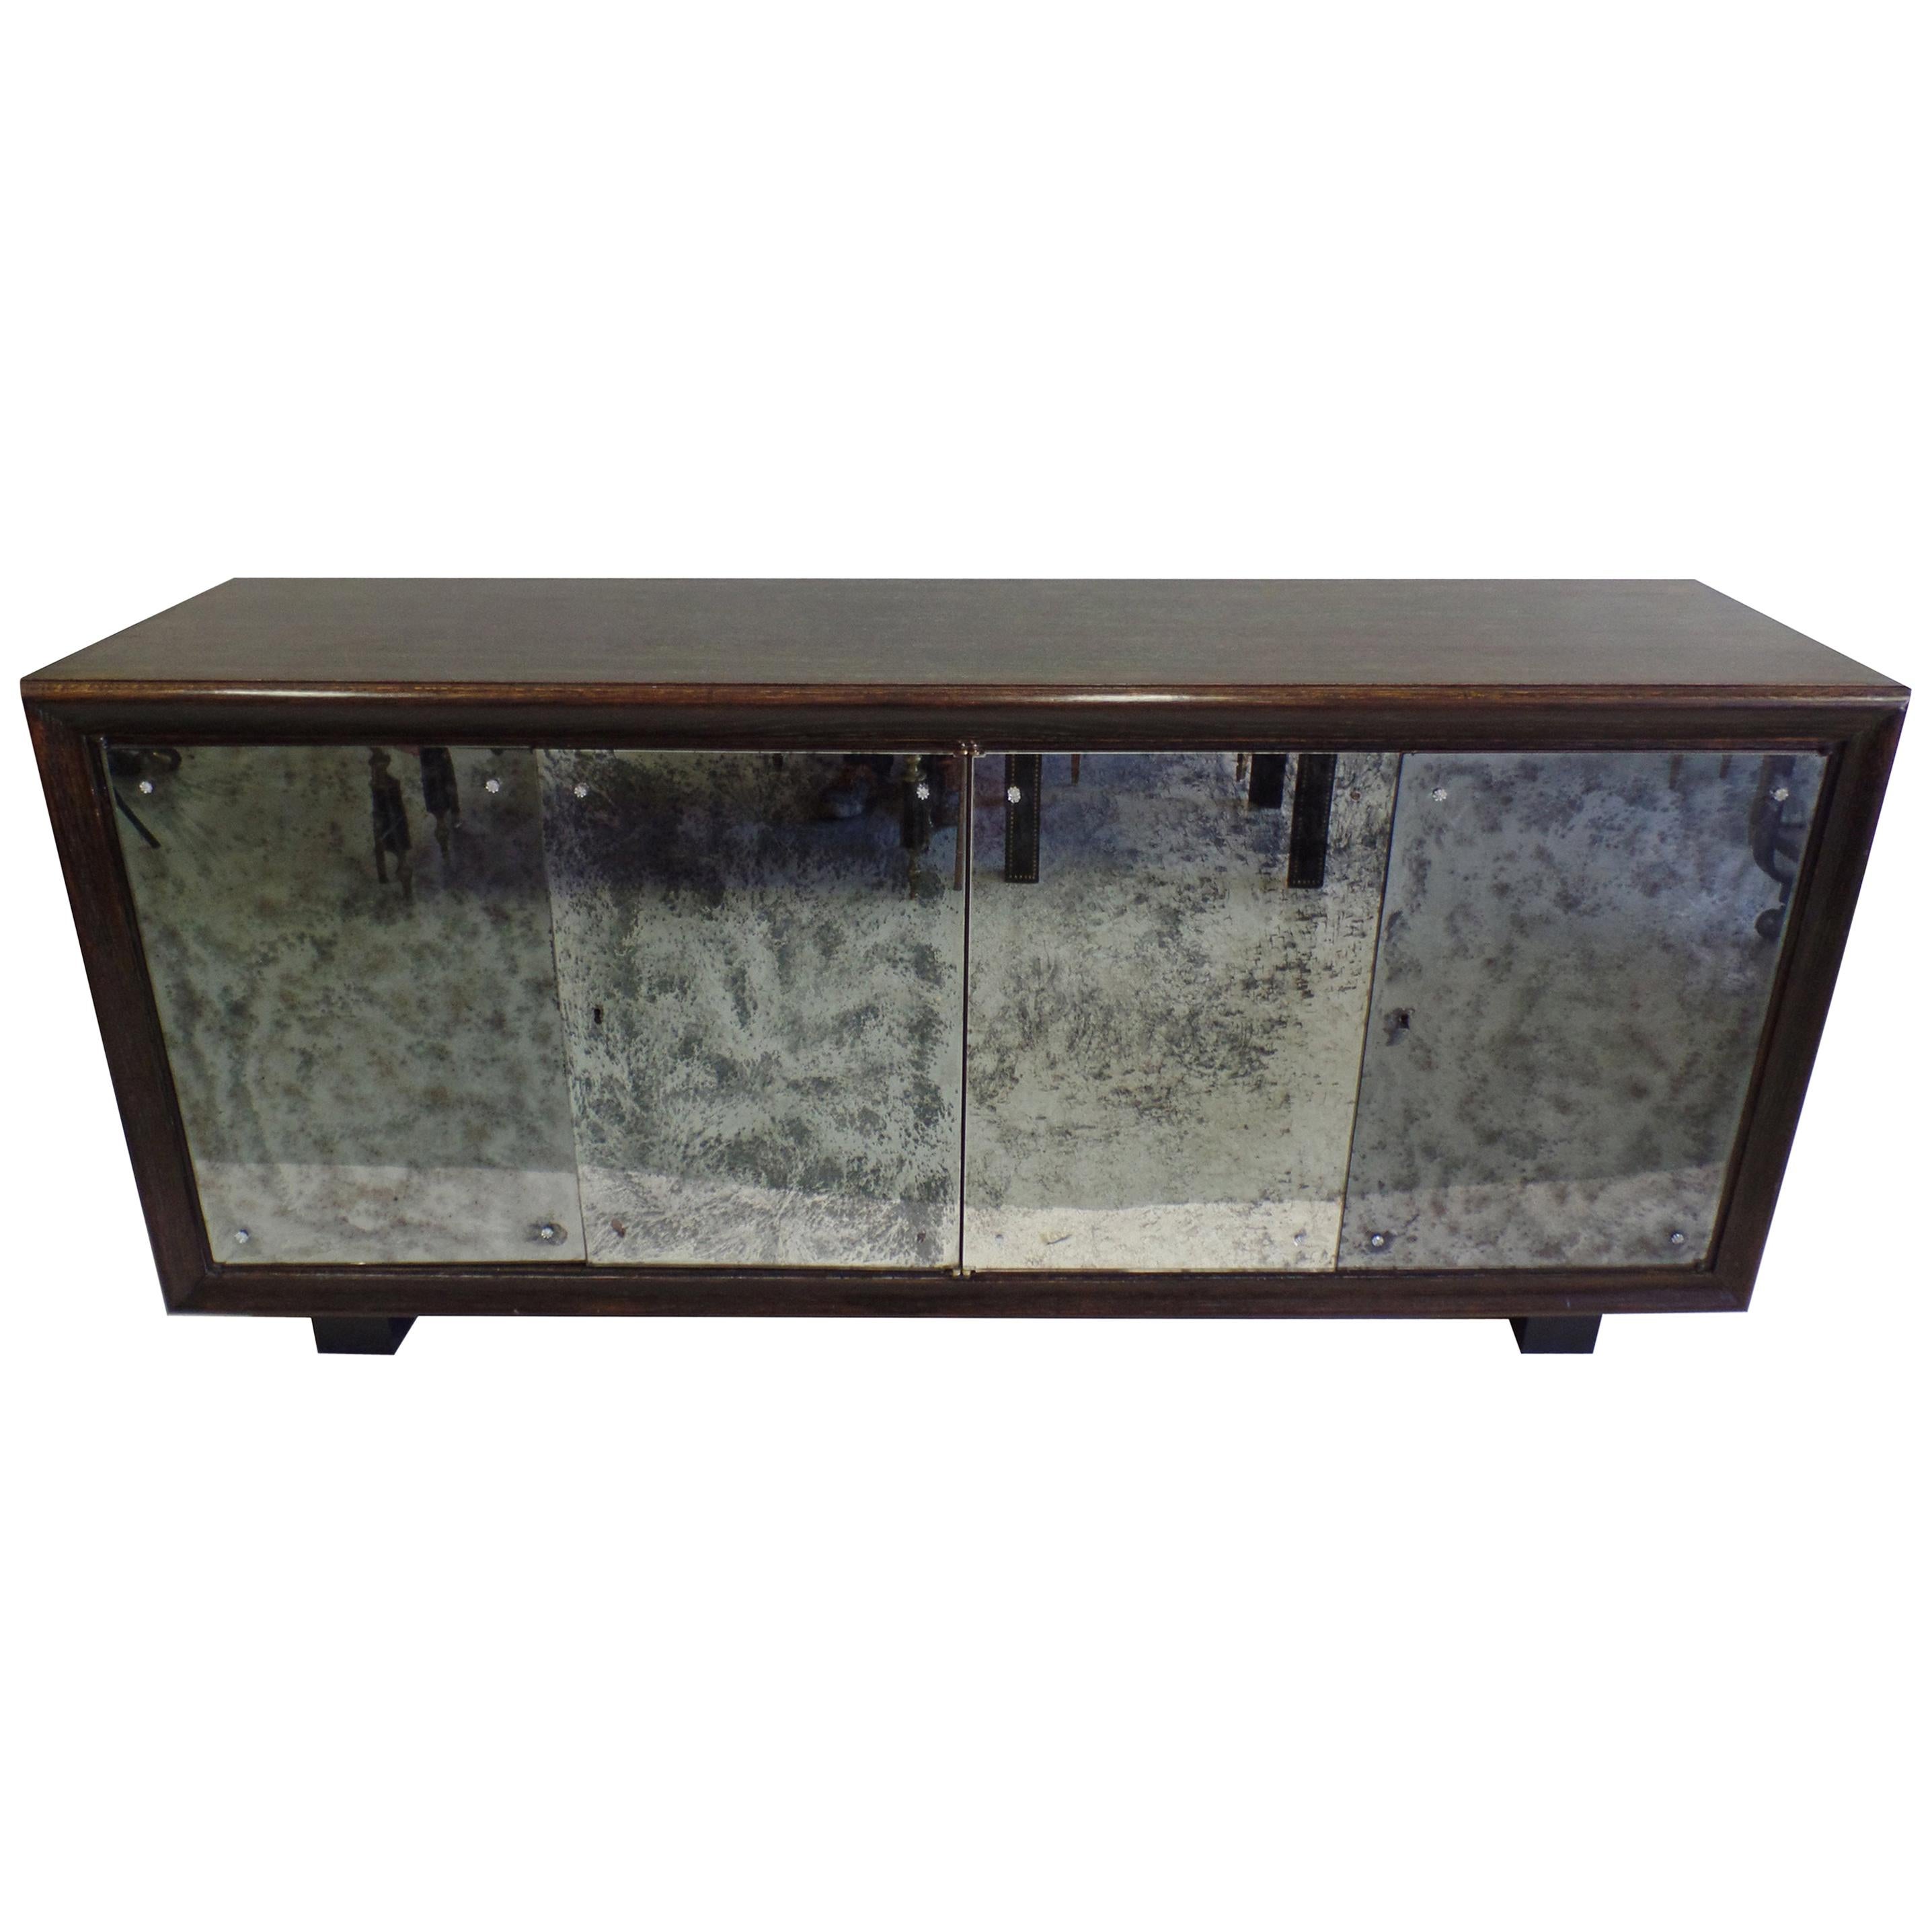 French Art Deco Cerused Oak and Mercury Mirrored Sideboard, Eugene Printz, 1930 For Sale